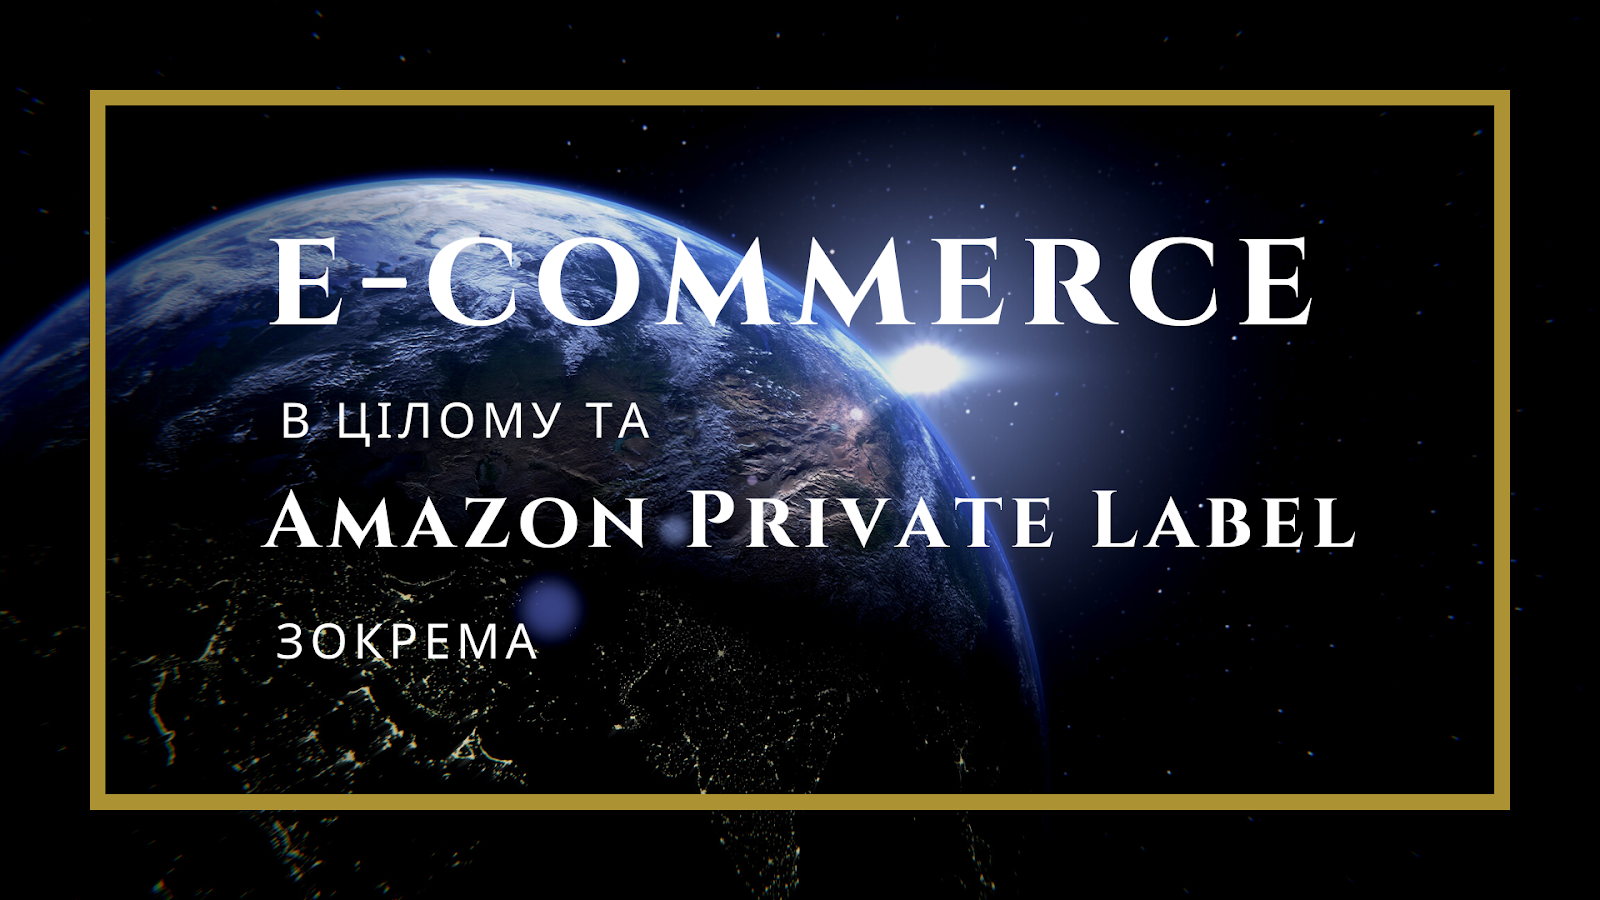 Why e-commerce and Amazon Private Label business are promising